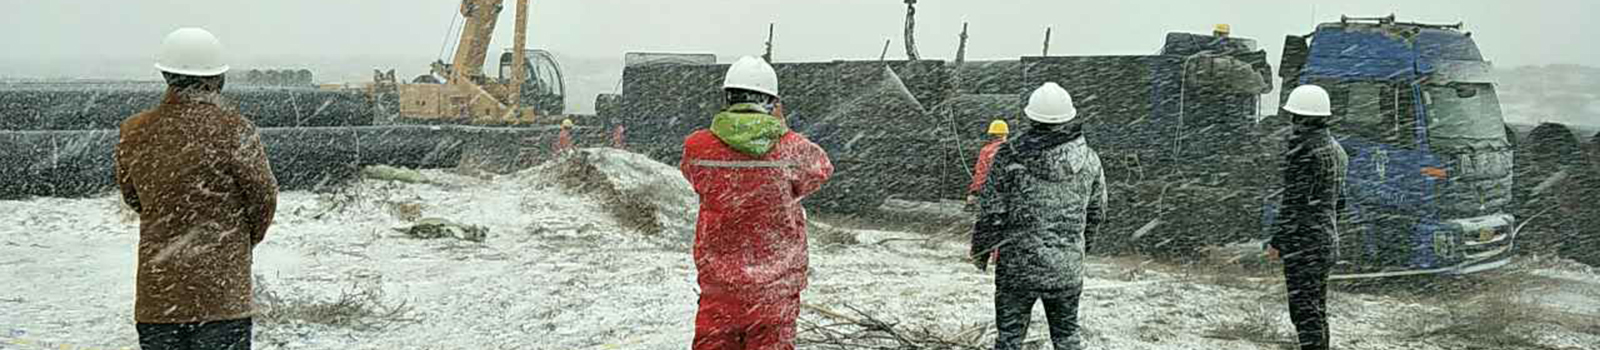 Construct in the snow to ensure the schedule，Cooperate among the team to compose an ode